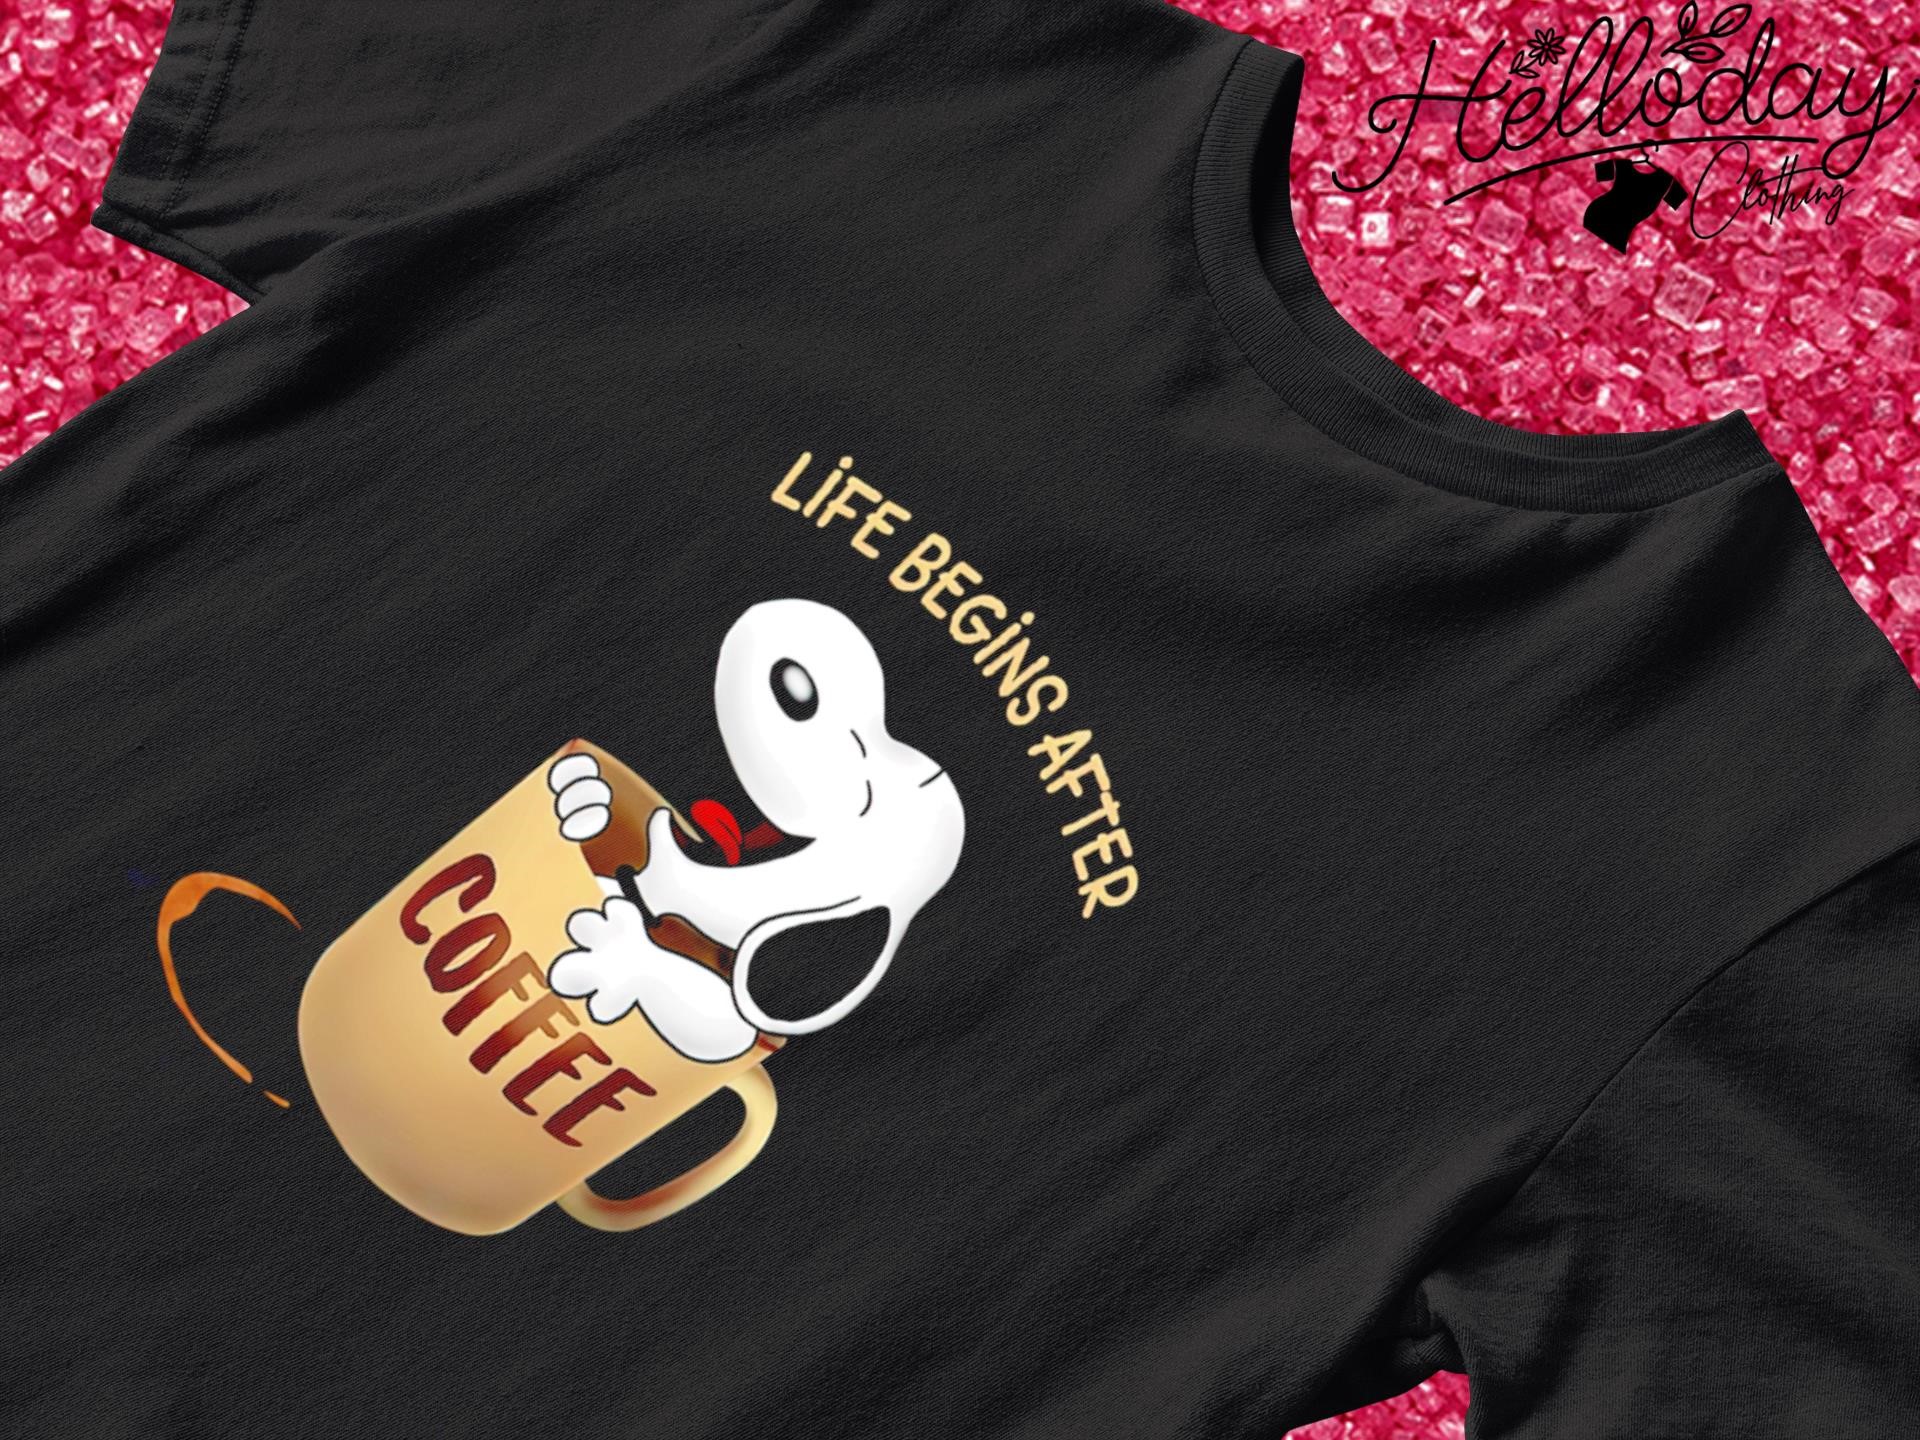 Snoopy Coffee life begins after shirt